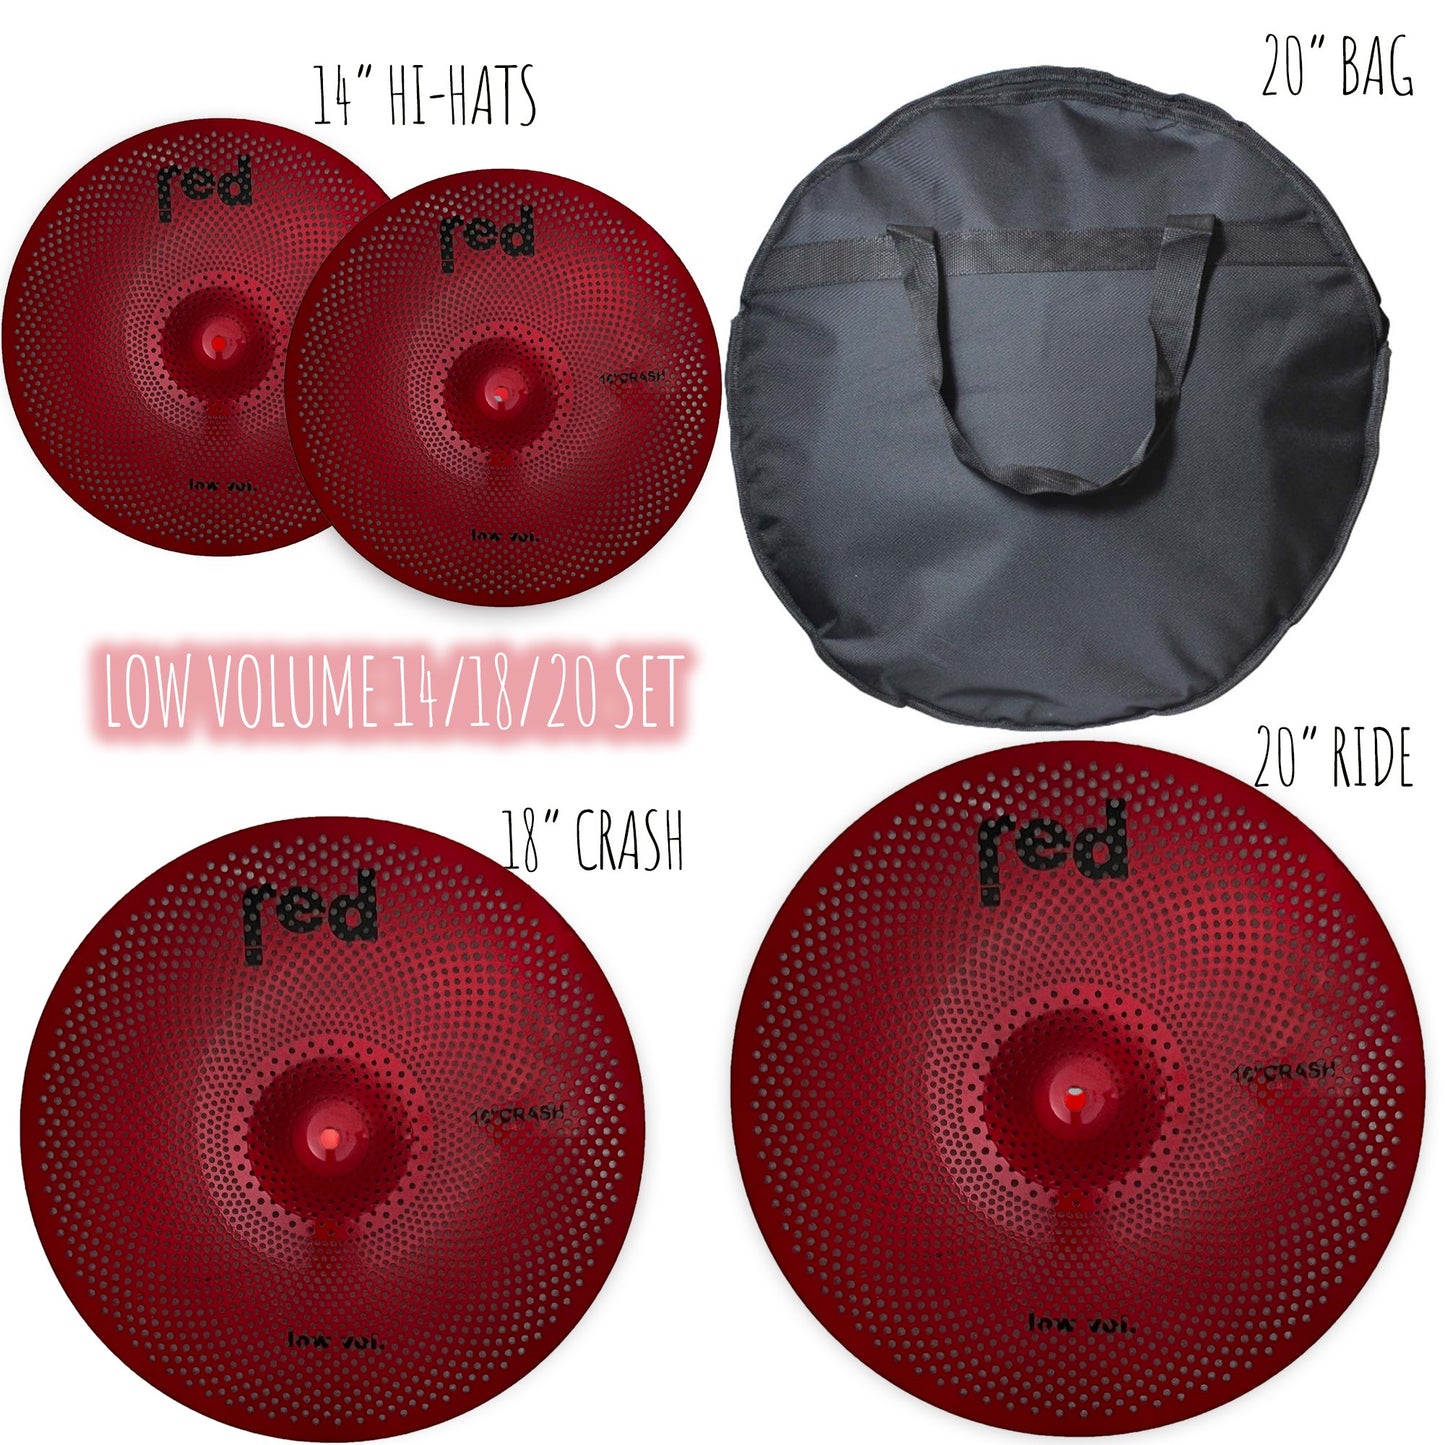 Low Volume 4 piece Cymbal Set with free 20" Bag